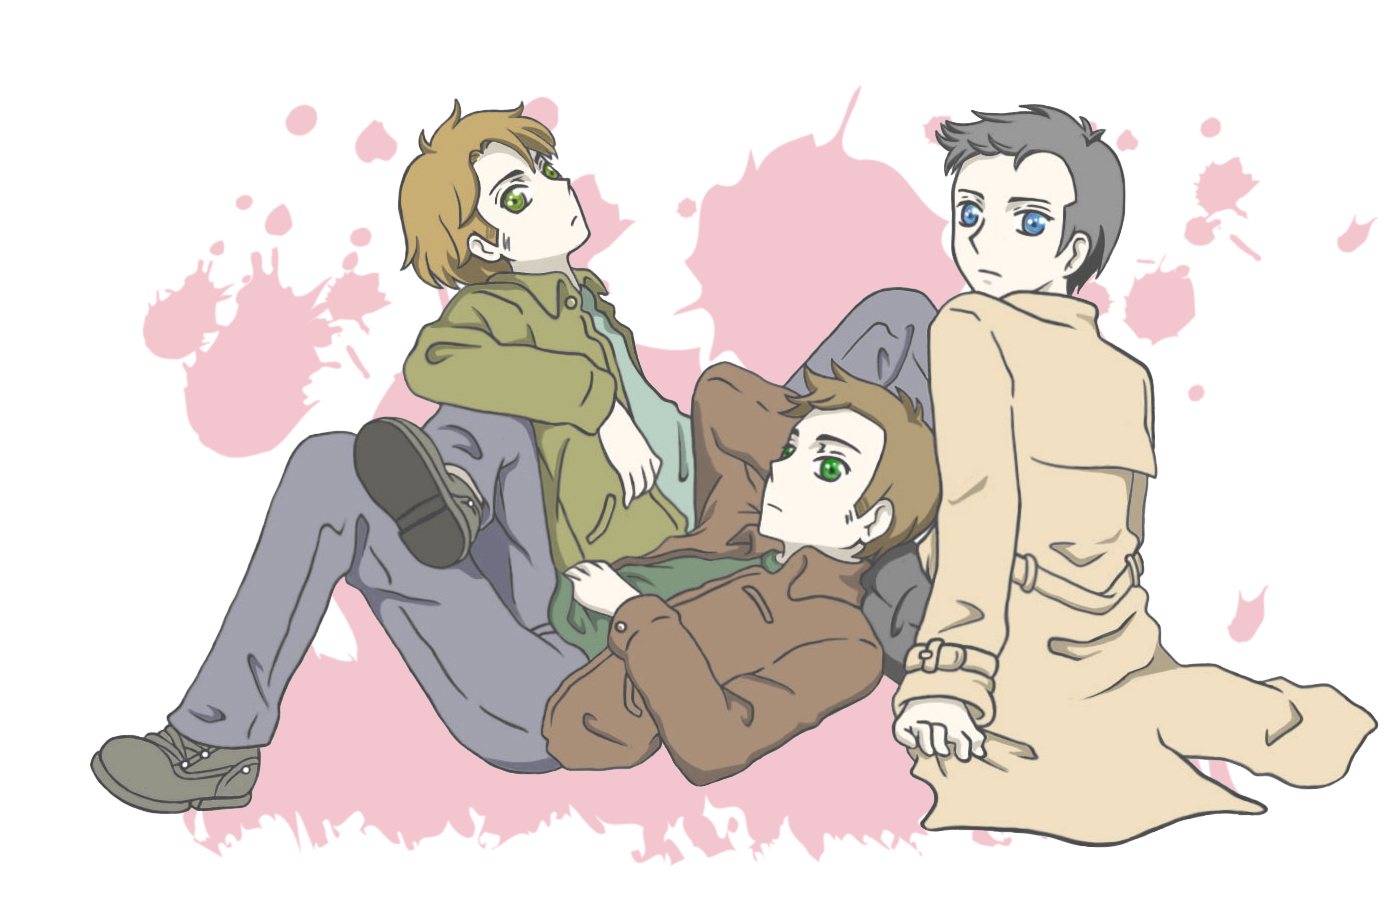 The Team Free Will by MugenMusouka